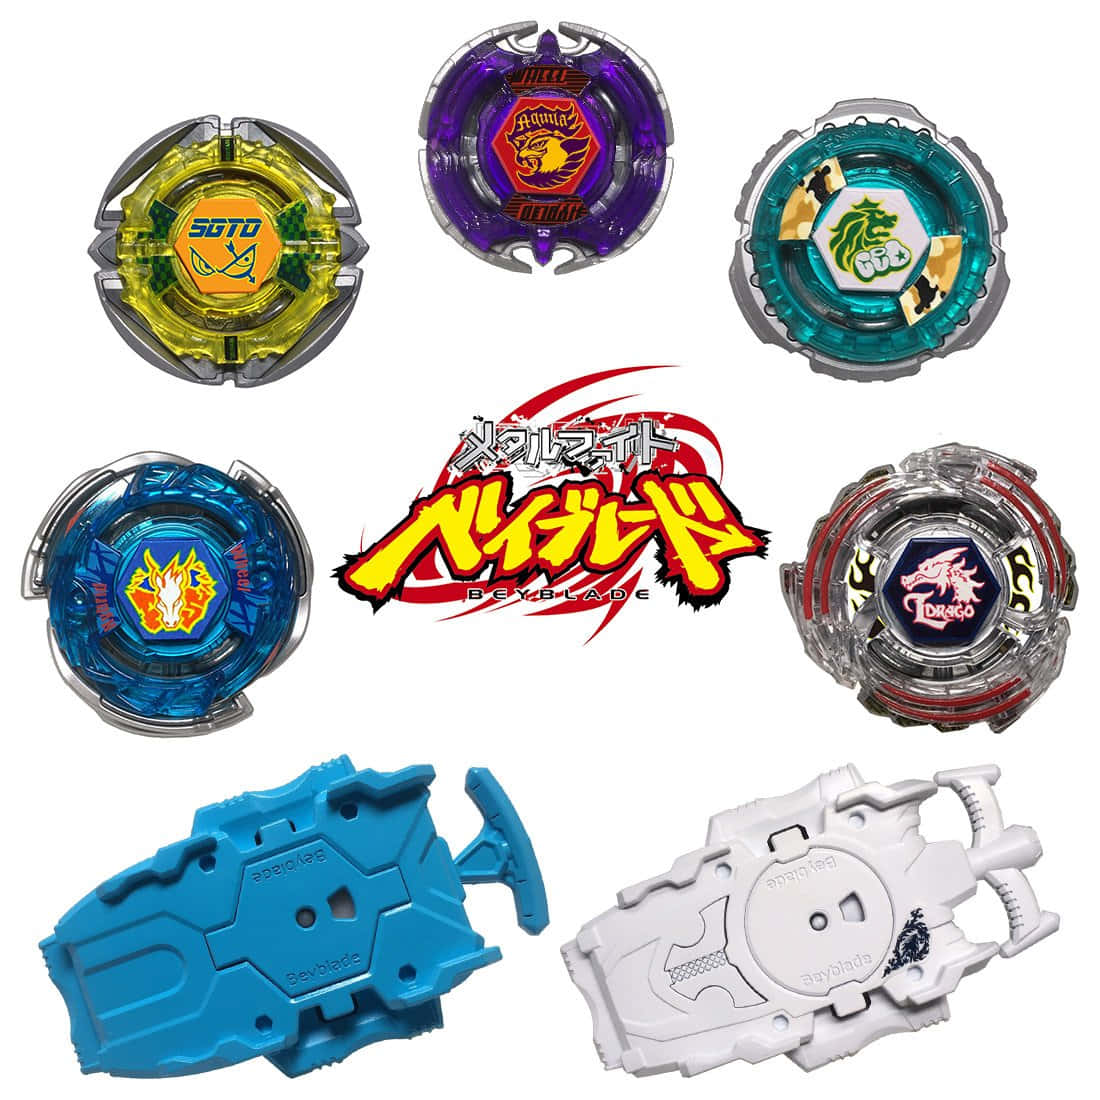 Unleash the power of Beyblade Burst with state-of-the-art technology